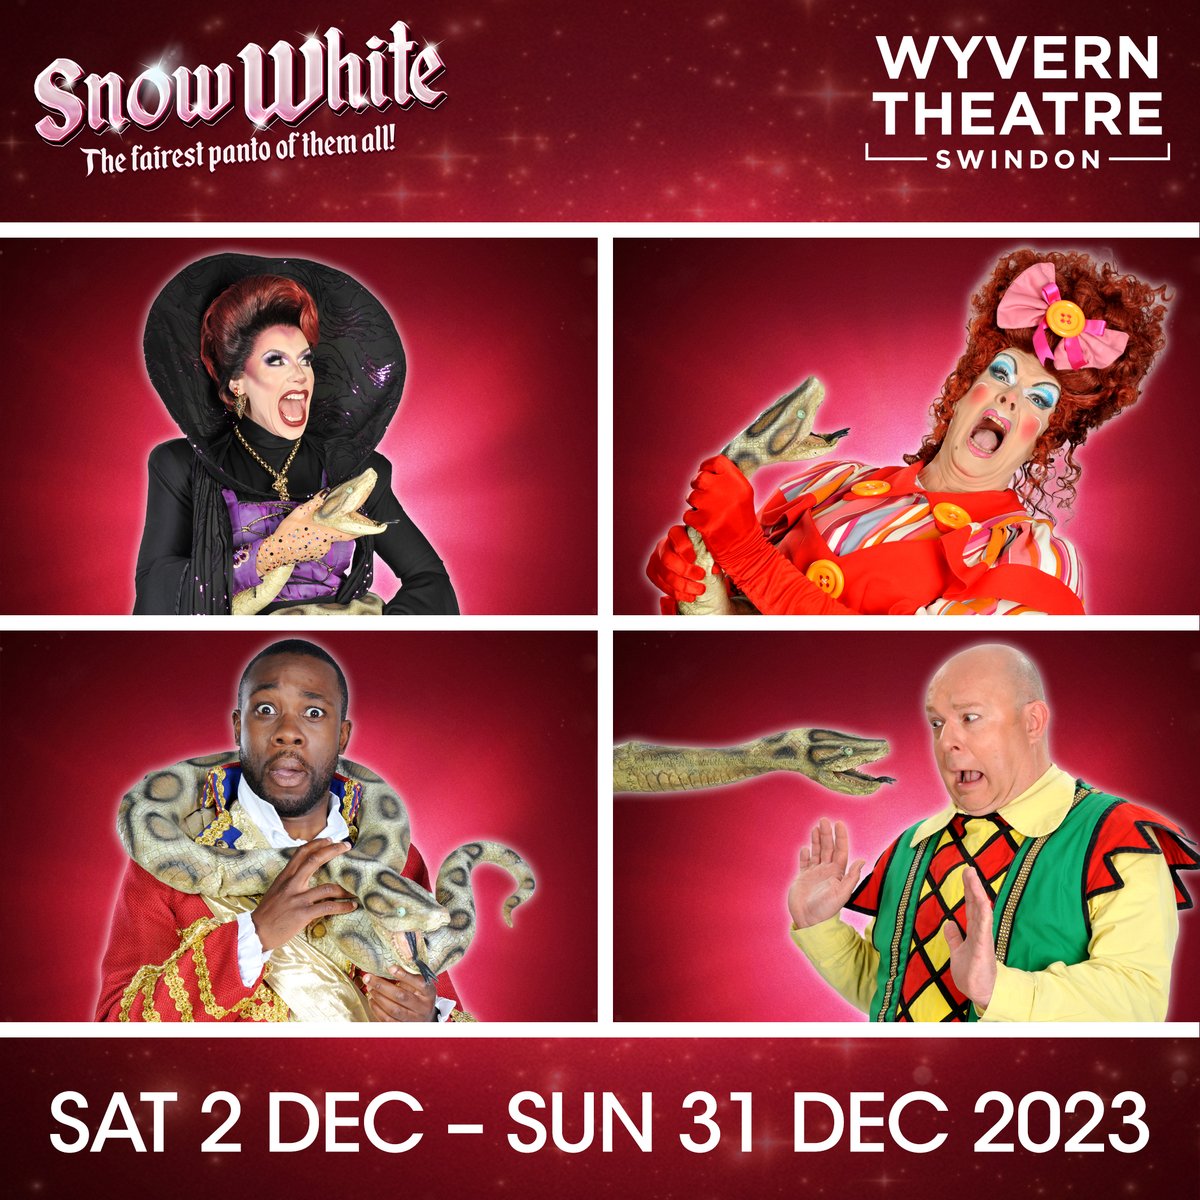 ⭐@imacelebrity is back tonight! 🐍If you want to see more villainous creatures, poisonous food and unforgettable adventures then be sure to book your Snow White tickets soon! @DivinaDeCampo @NathanConnortv @RealPaulBurling @DavidAshley5678 @DorranceTweets